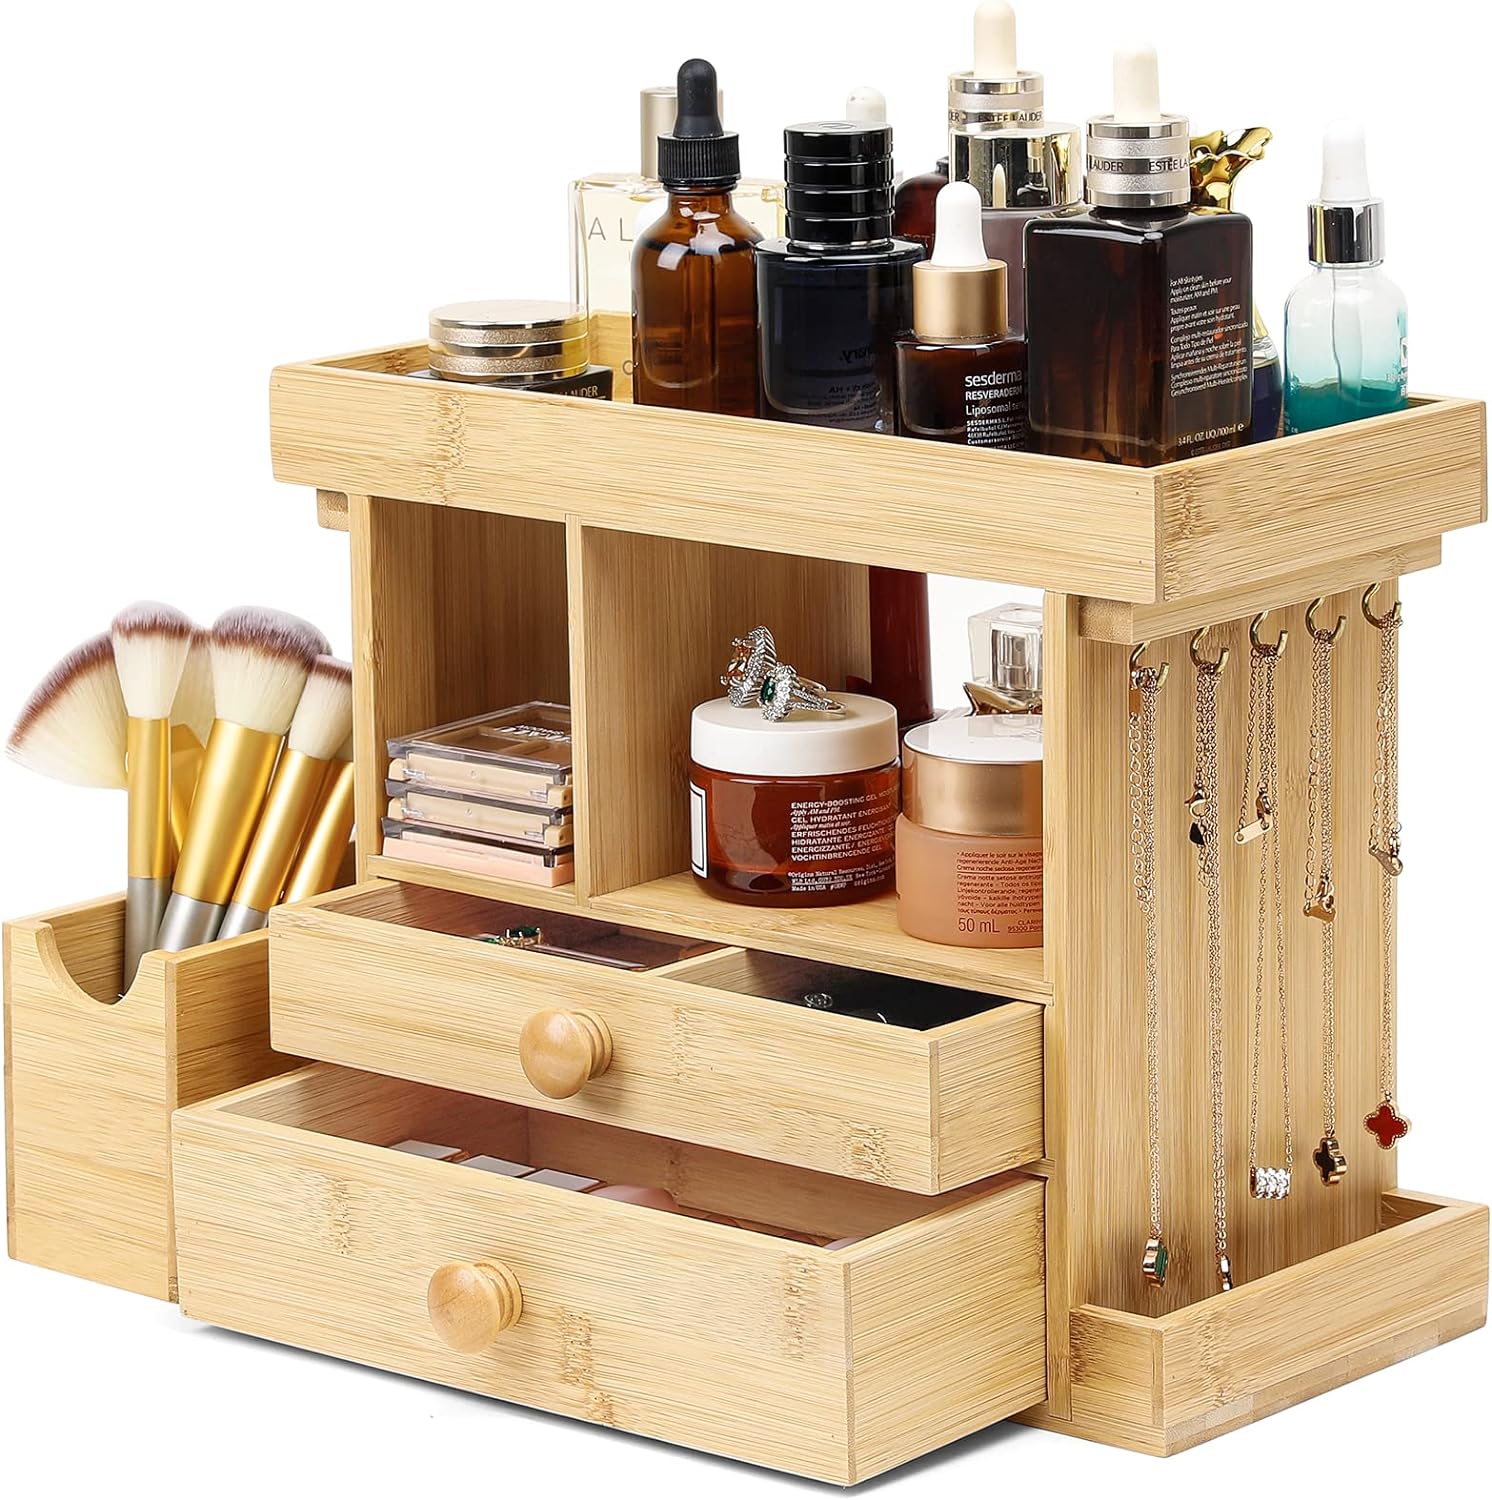 Homde Bamboo Makeup Organizer Cosmetic Jewelry Storage Organizer Multi-Function Make up Box Stand for Vanity, Desk, Bathroom, Bedroom with Hooks,Drawer,Silicone Lipstick Holder